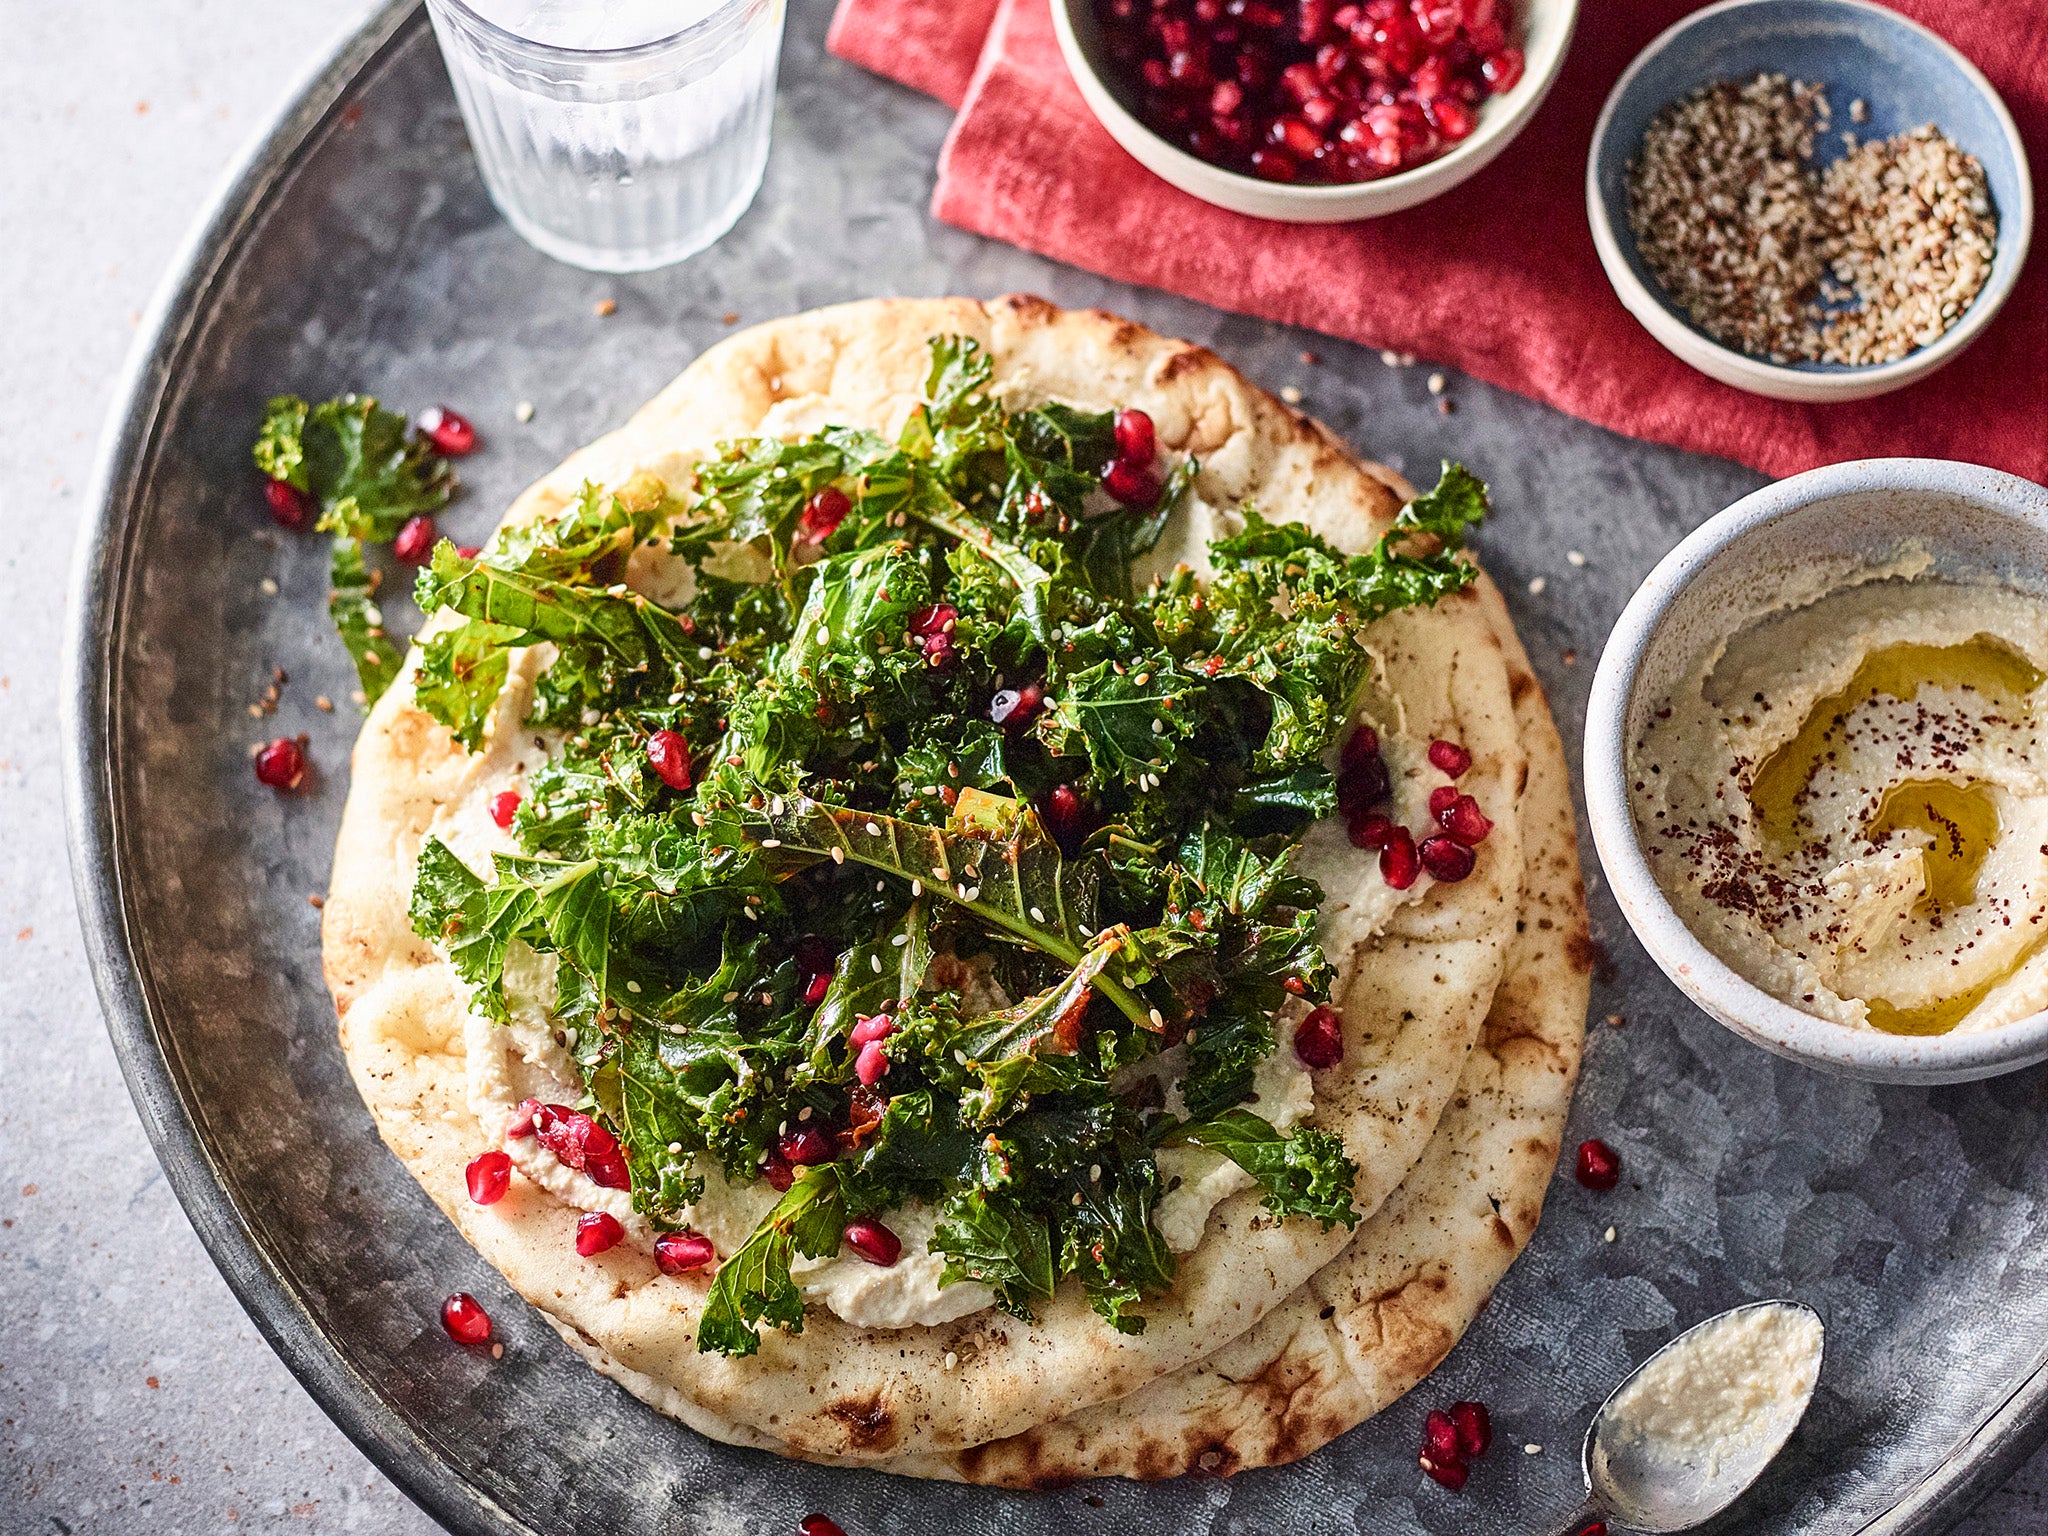 These harissa and kale flatbreads are a tasty alternative to lunchtime sandwiches